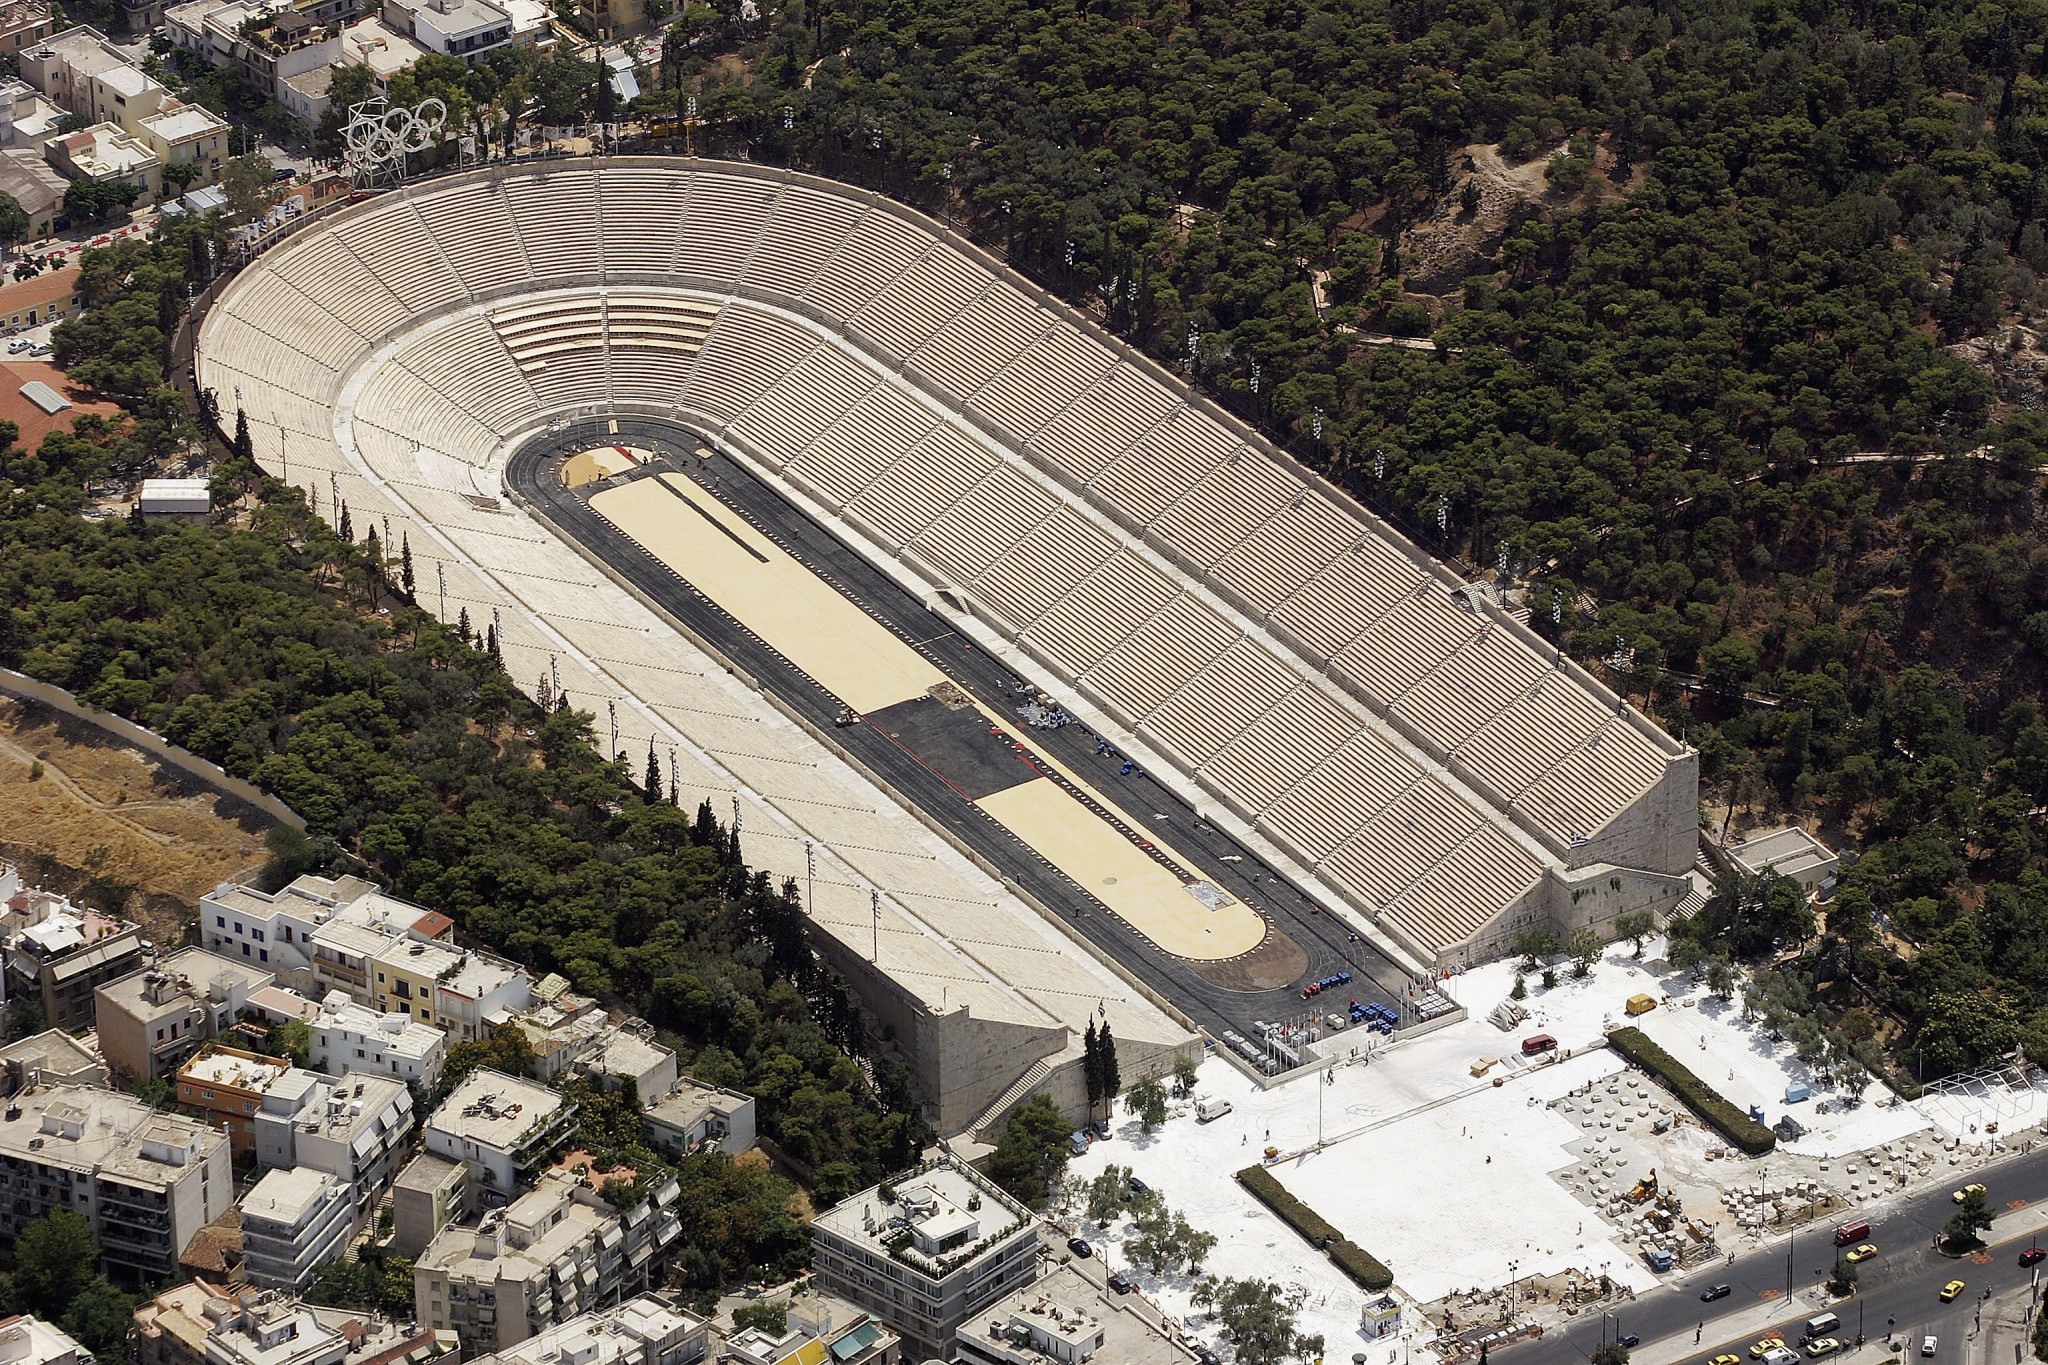 The Panathenaic Stadium marked the 100th anniversary of the modern Olympics in 1996 ©Getty Images